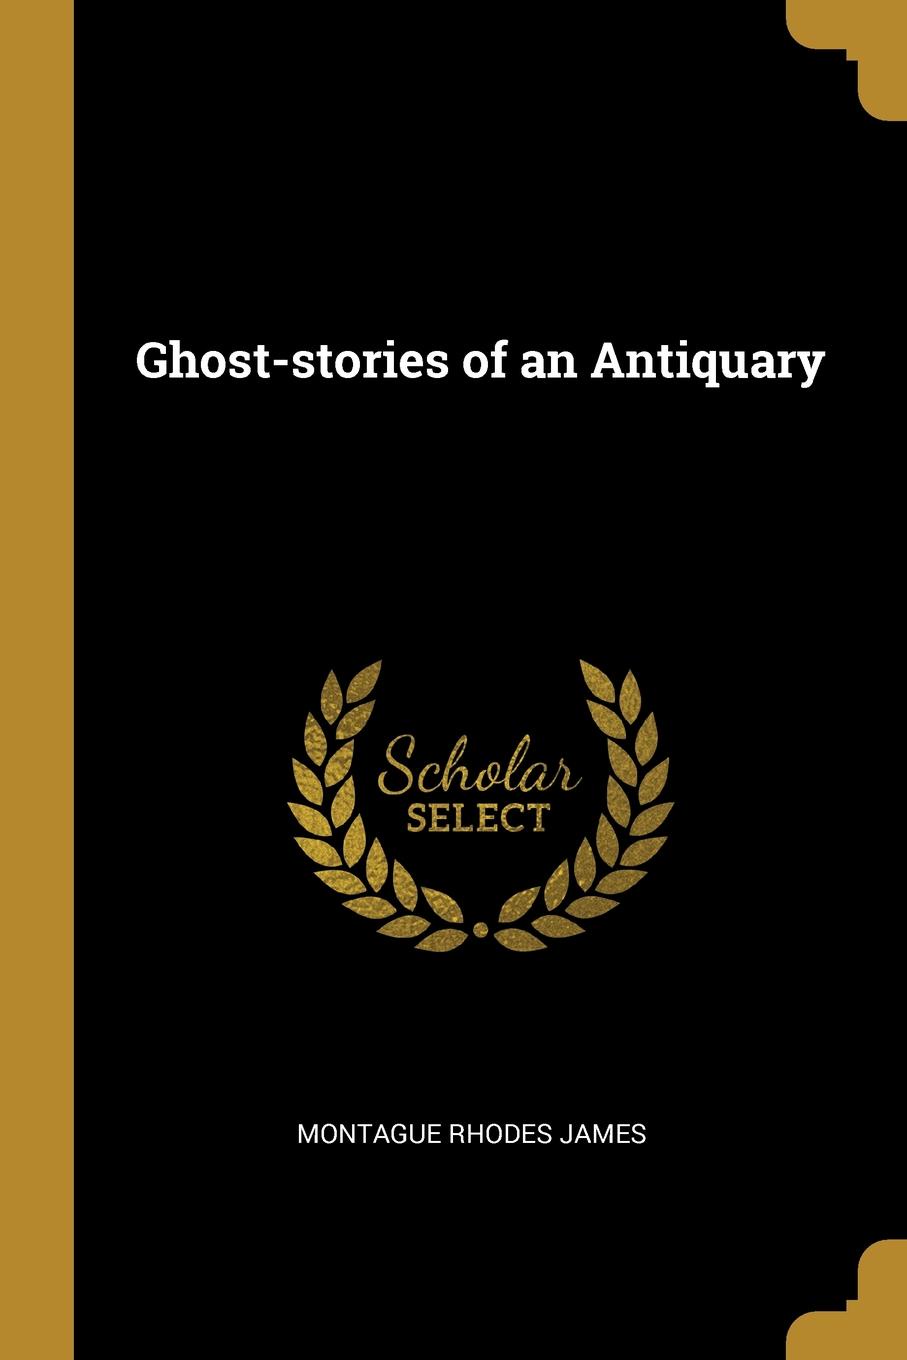 Ghost-stories of an Antiquary